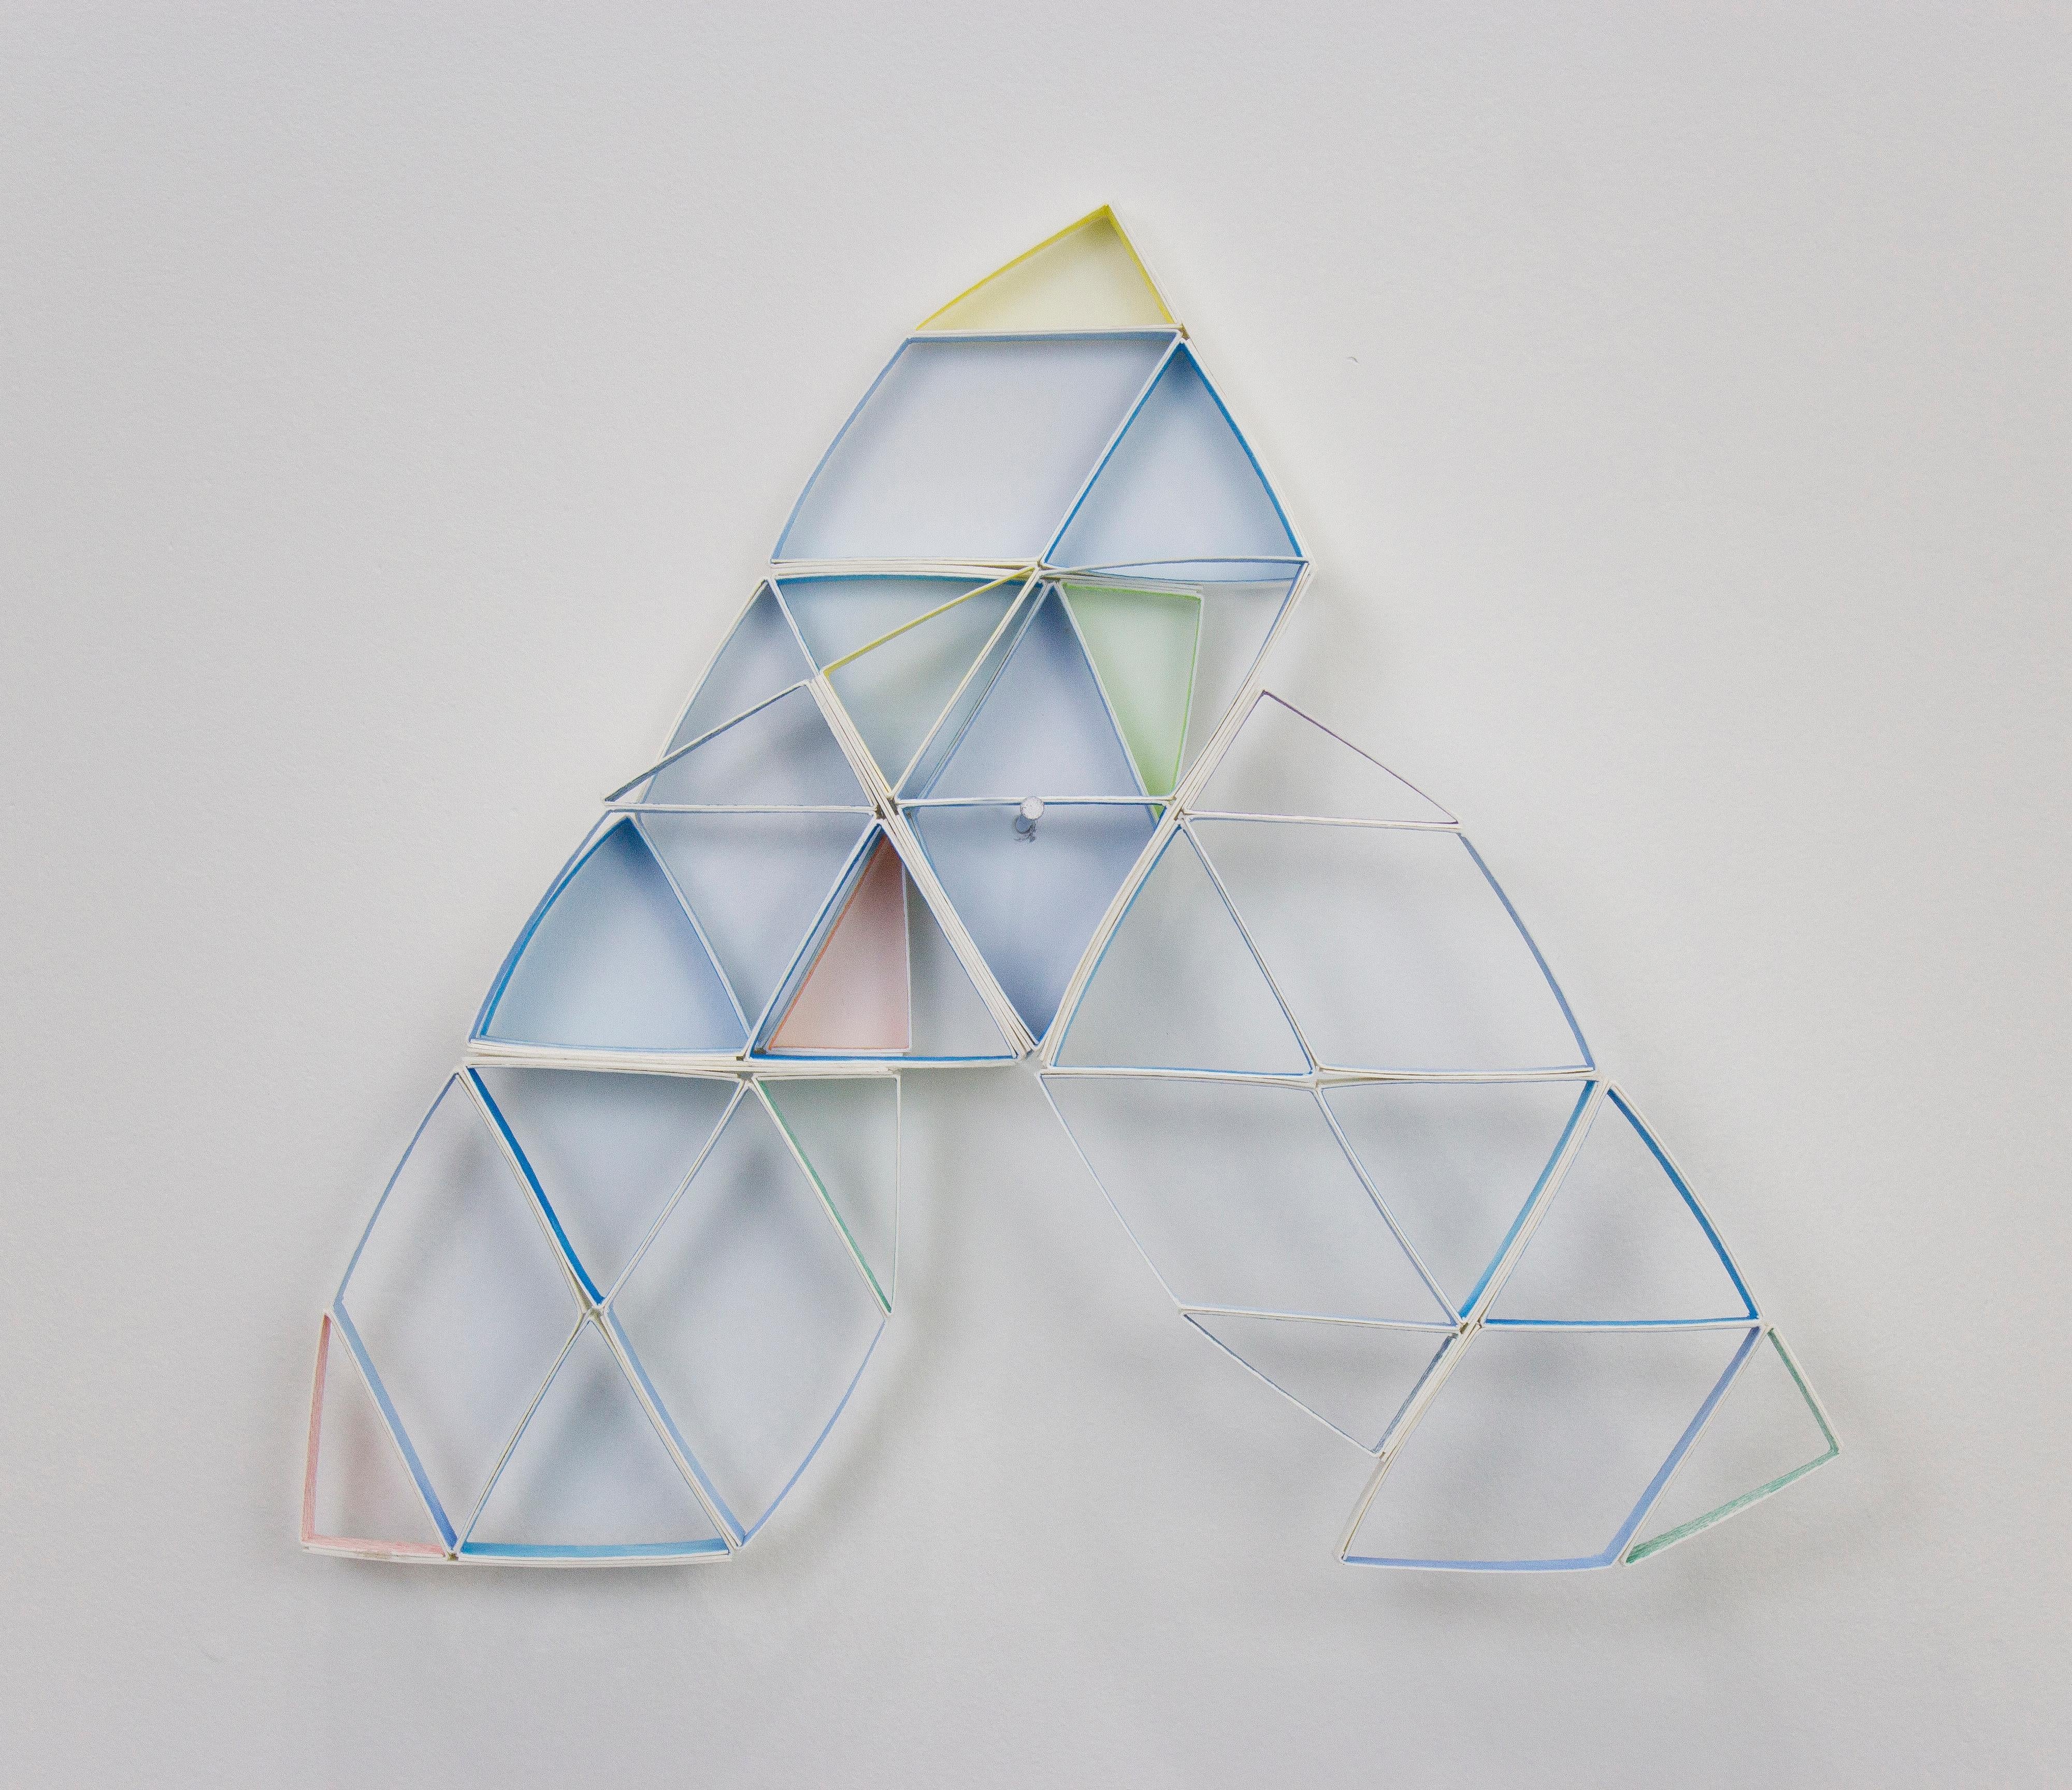 Improvisation 1 for Equilateral Triangle (Partial)  - Art by Alex Paik